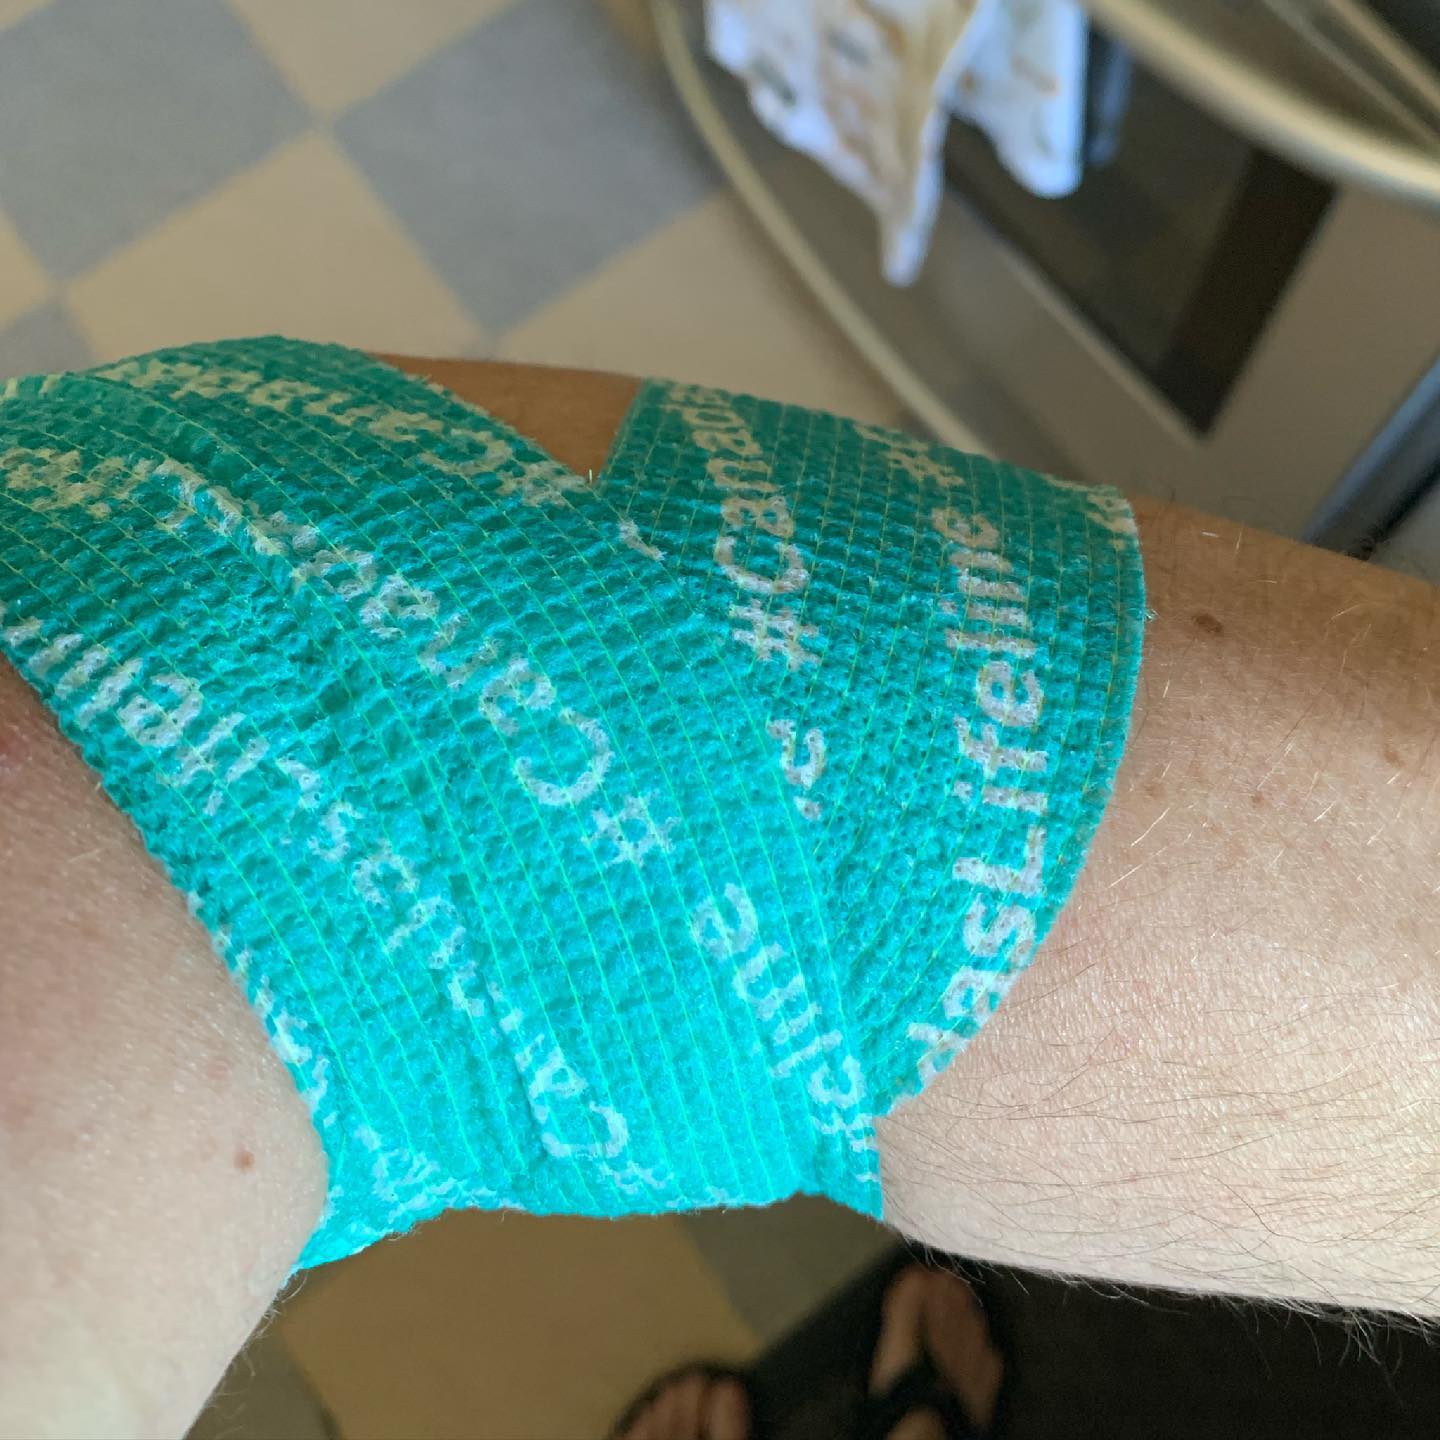 Donation 103 today. In and out with snacks in no time. #bloodsonation #blooddonor